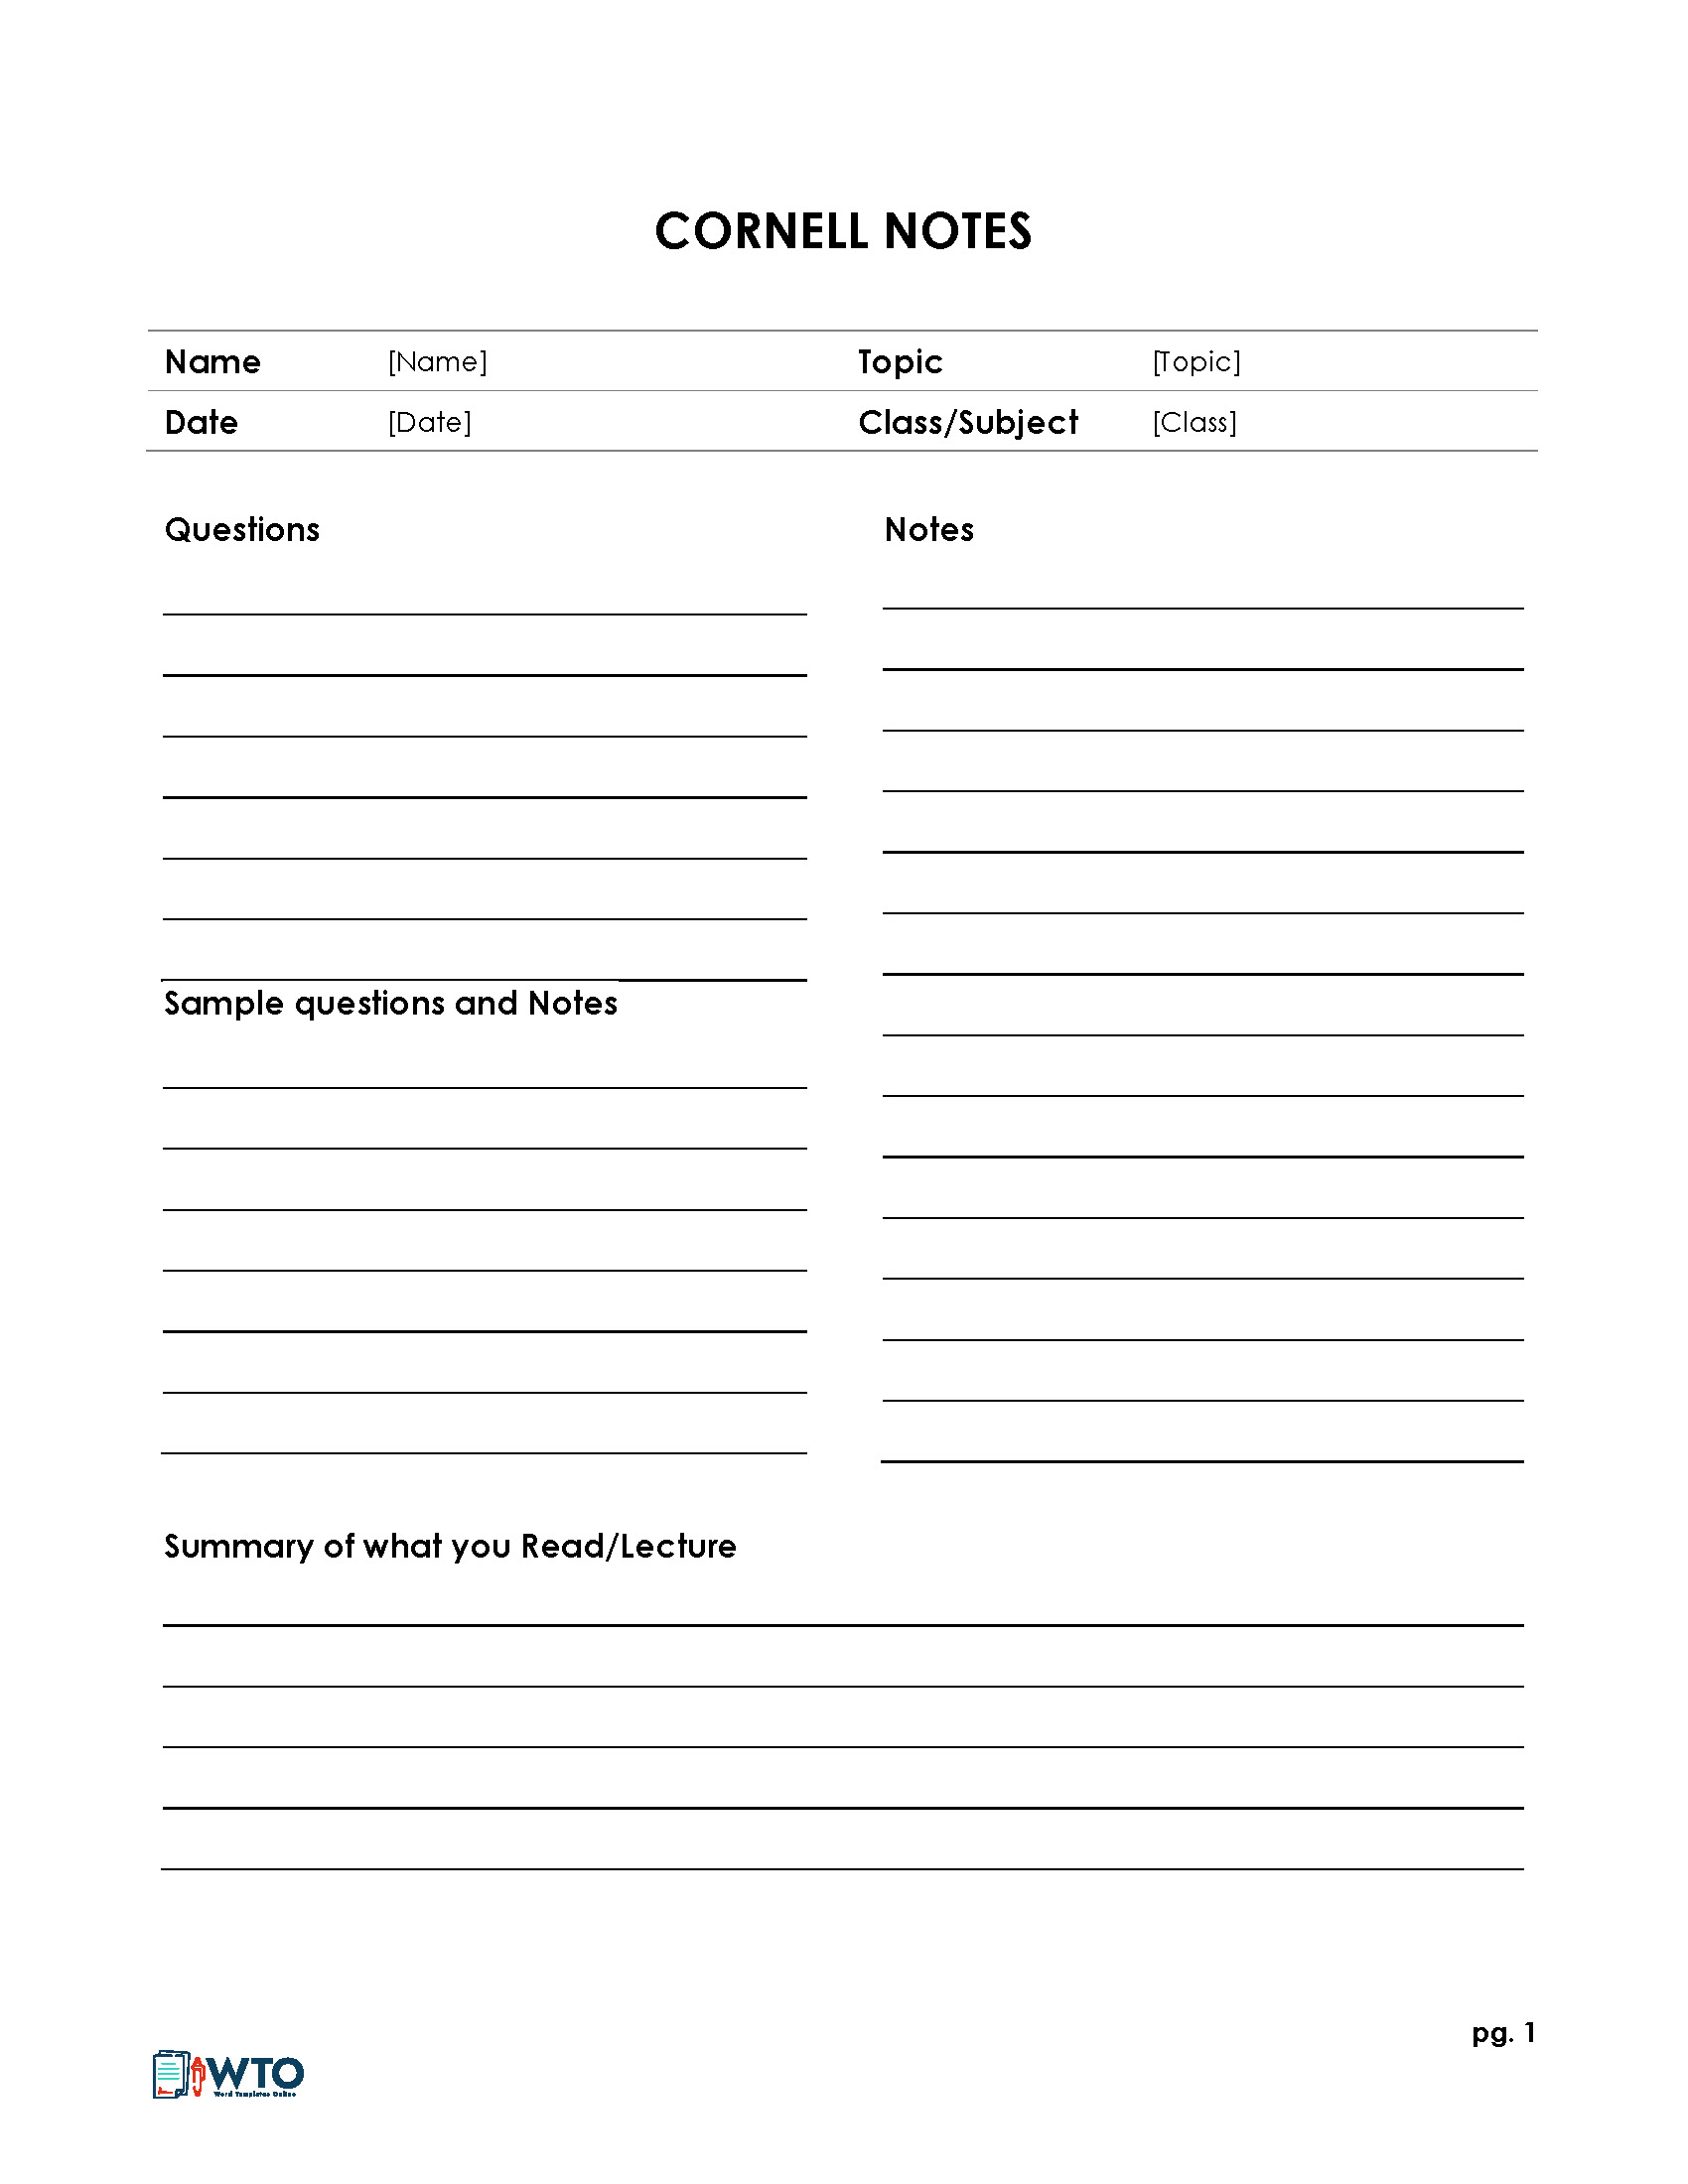 23 Free Cornell Note Templates (Cornell Note Taking Explained) For Google Docs Cornell Notes Template